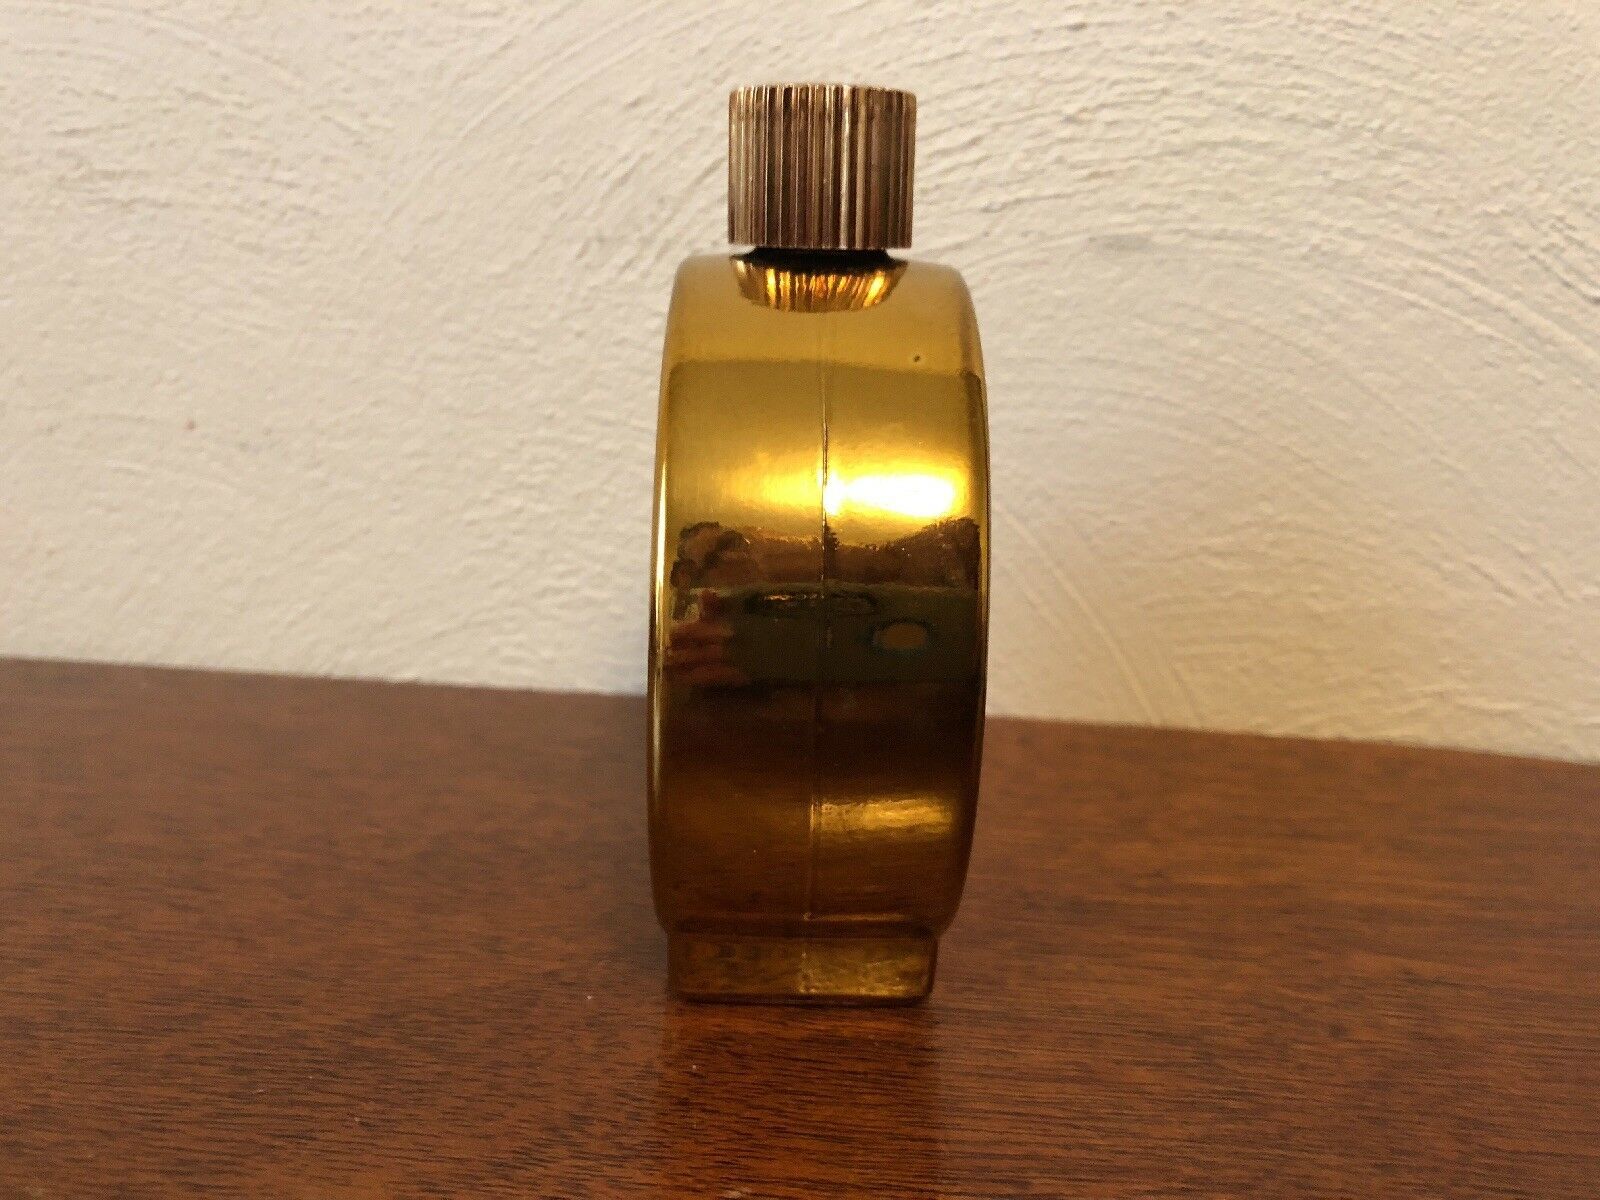 AVON Bravo after shave 1970 Indian head penny - Decanters